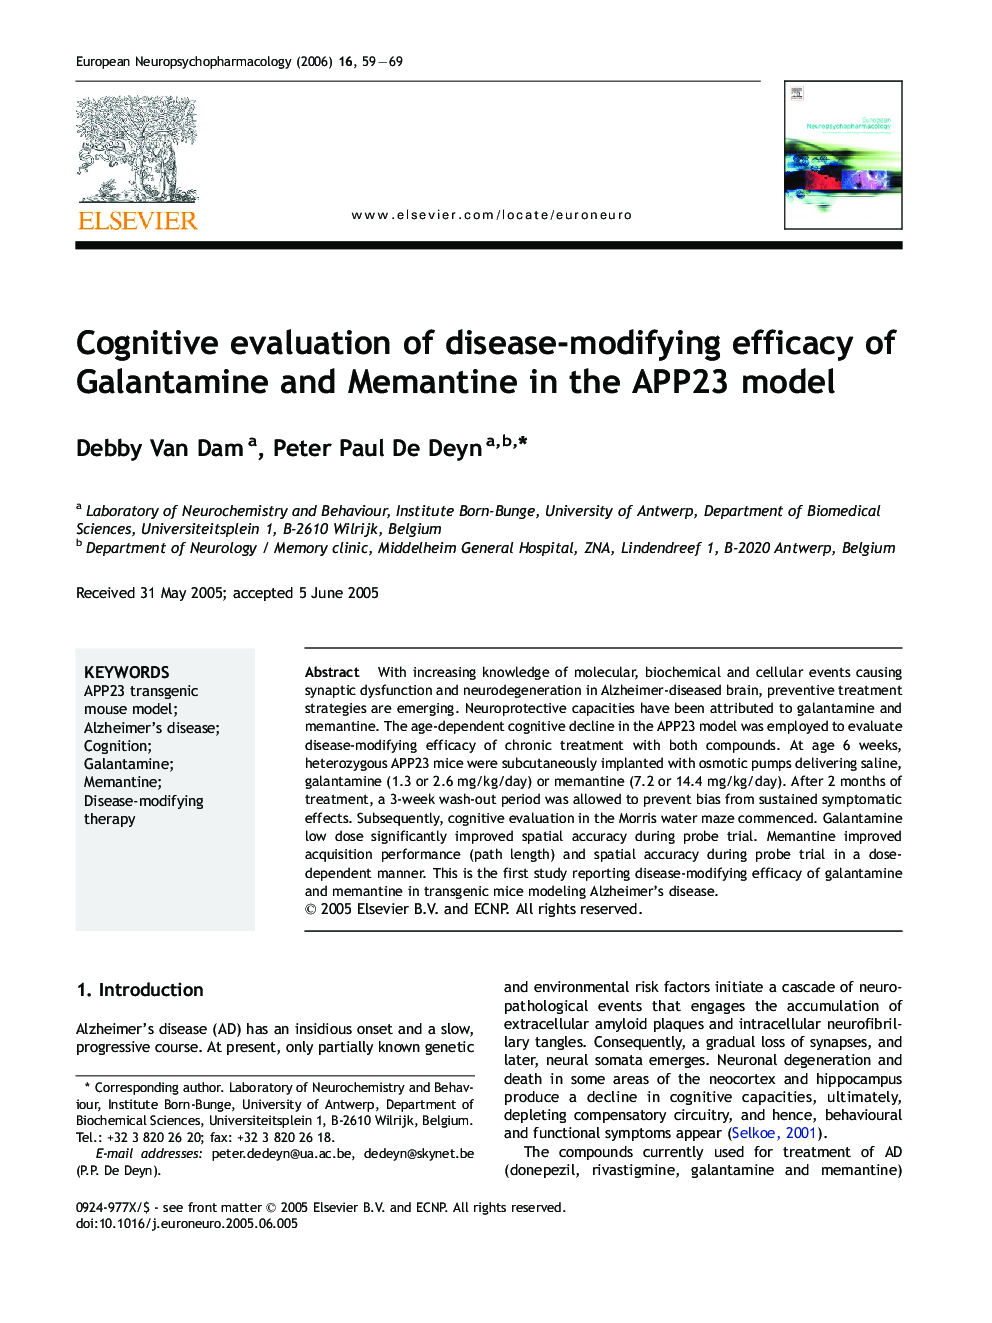 Cognitive evaluation of disease-modifying efficacy of Galantamine and Memantine in the APP23 model